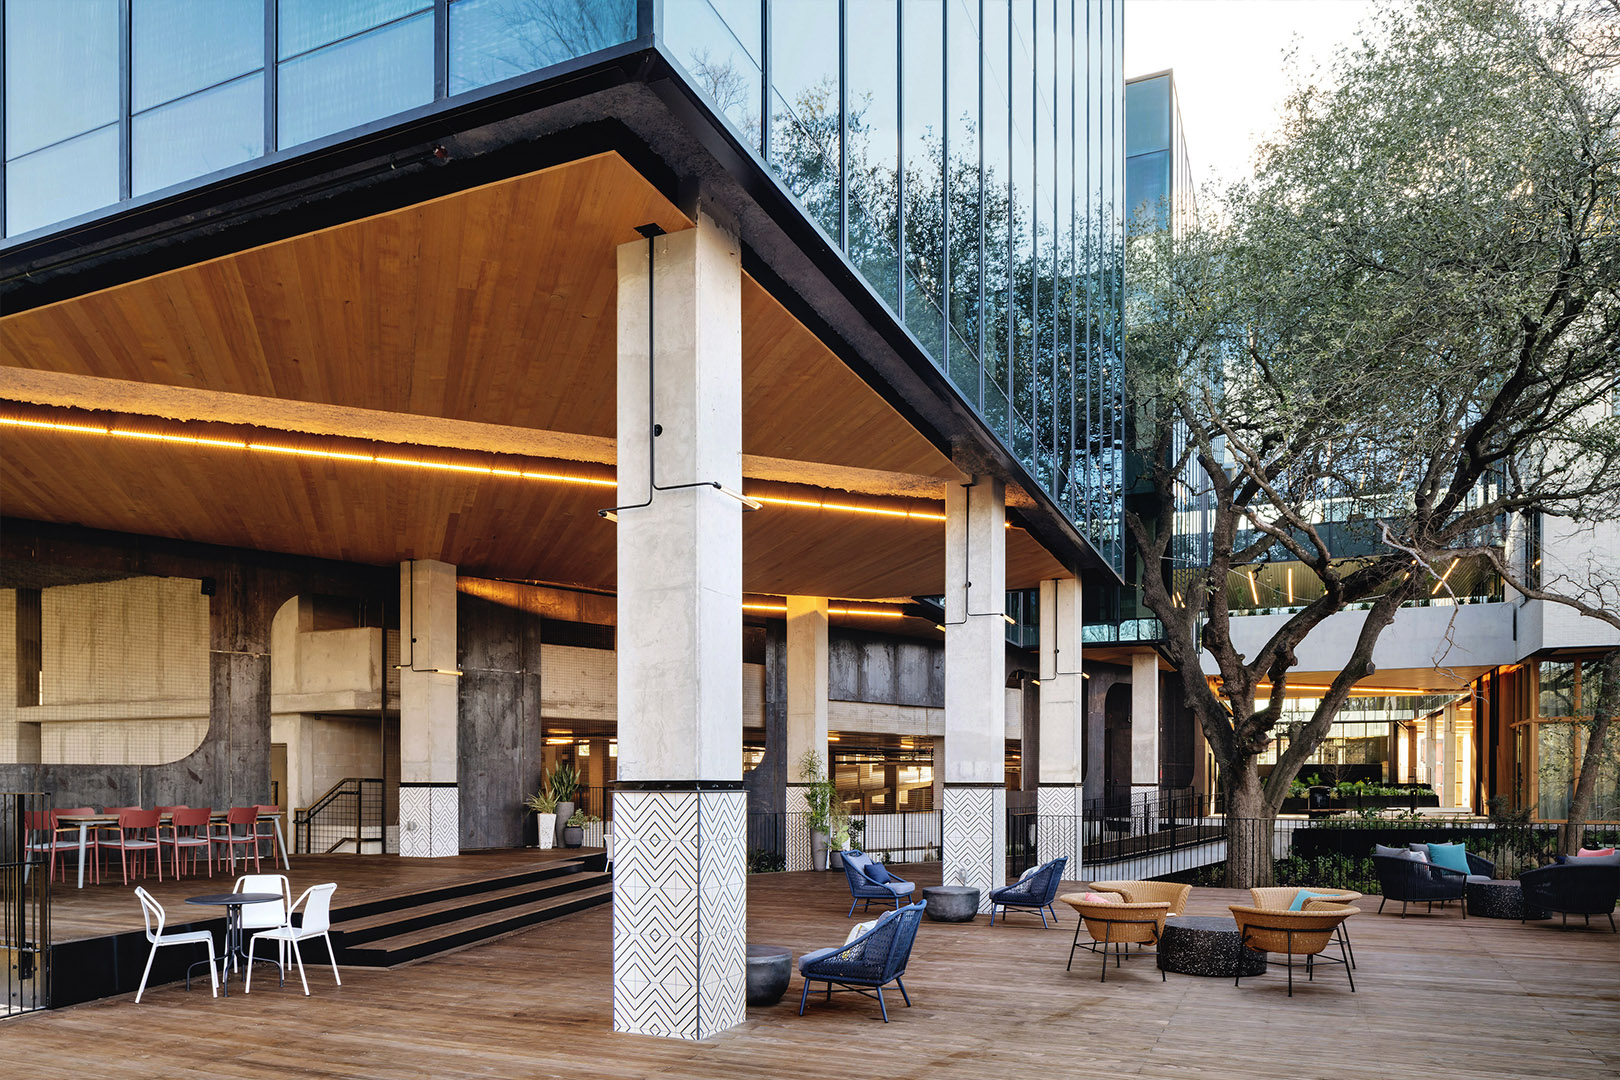 The newly constructed outdoor deck space at Bouldin Creek office building in Austin, Texas. Photograph by Chase Daniel.